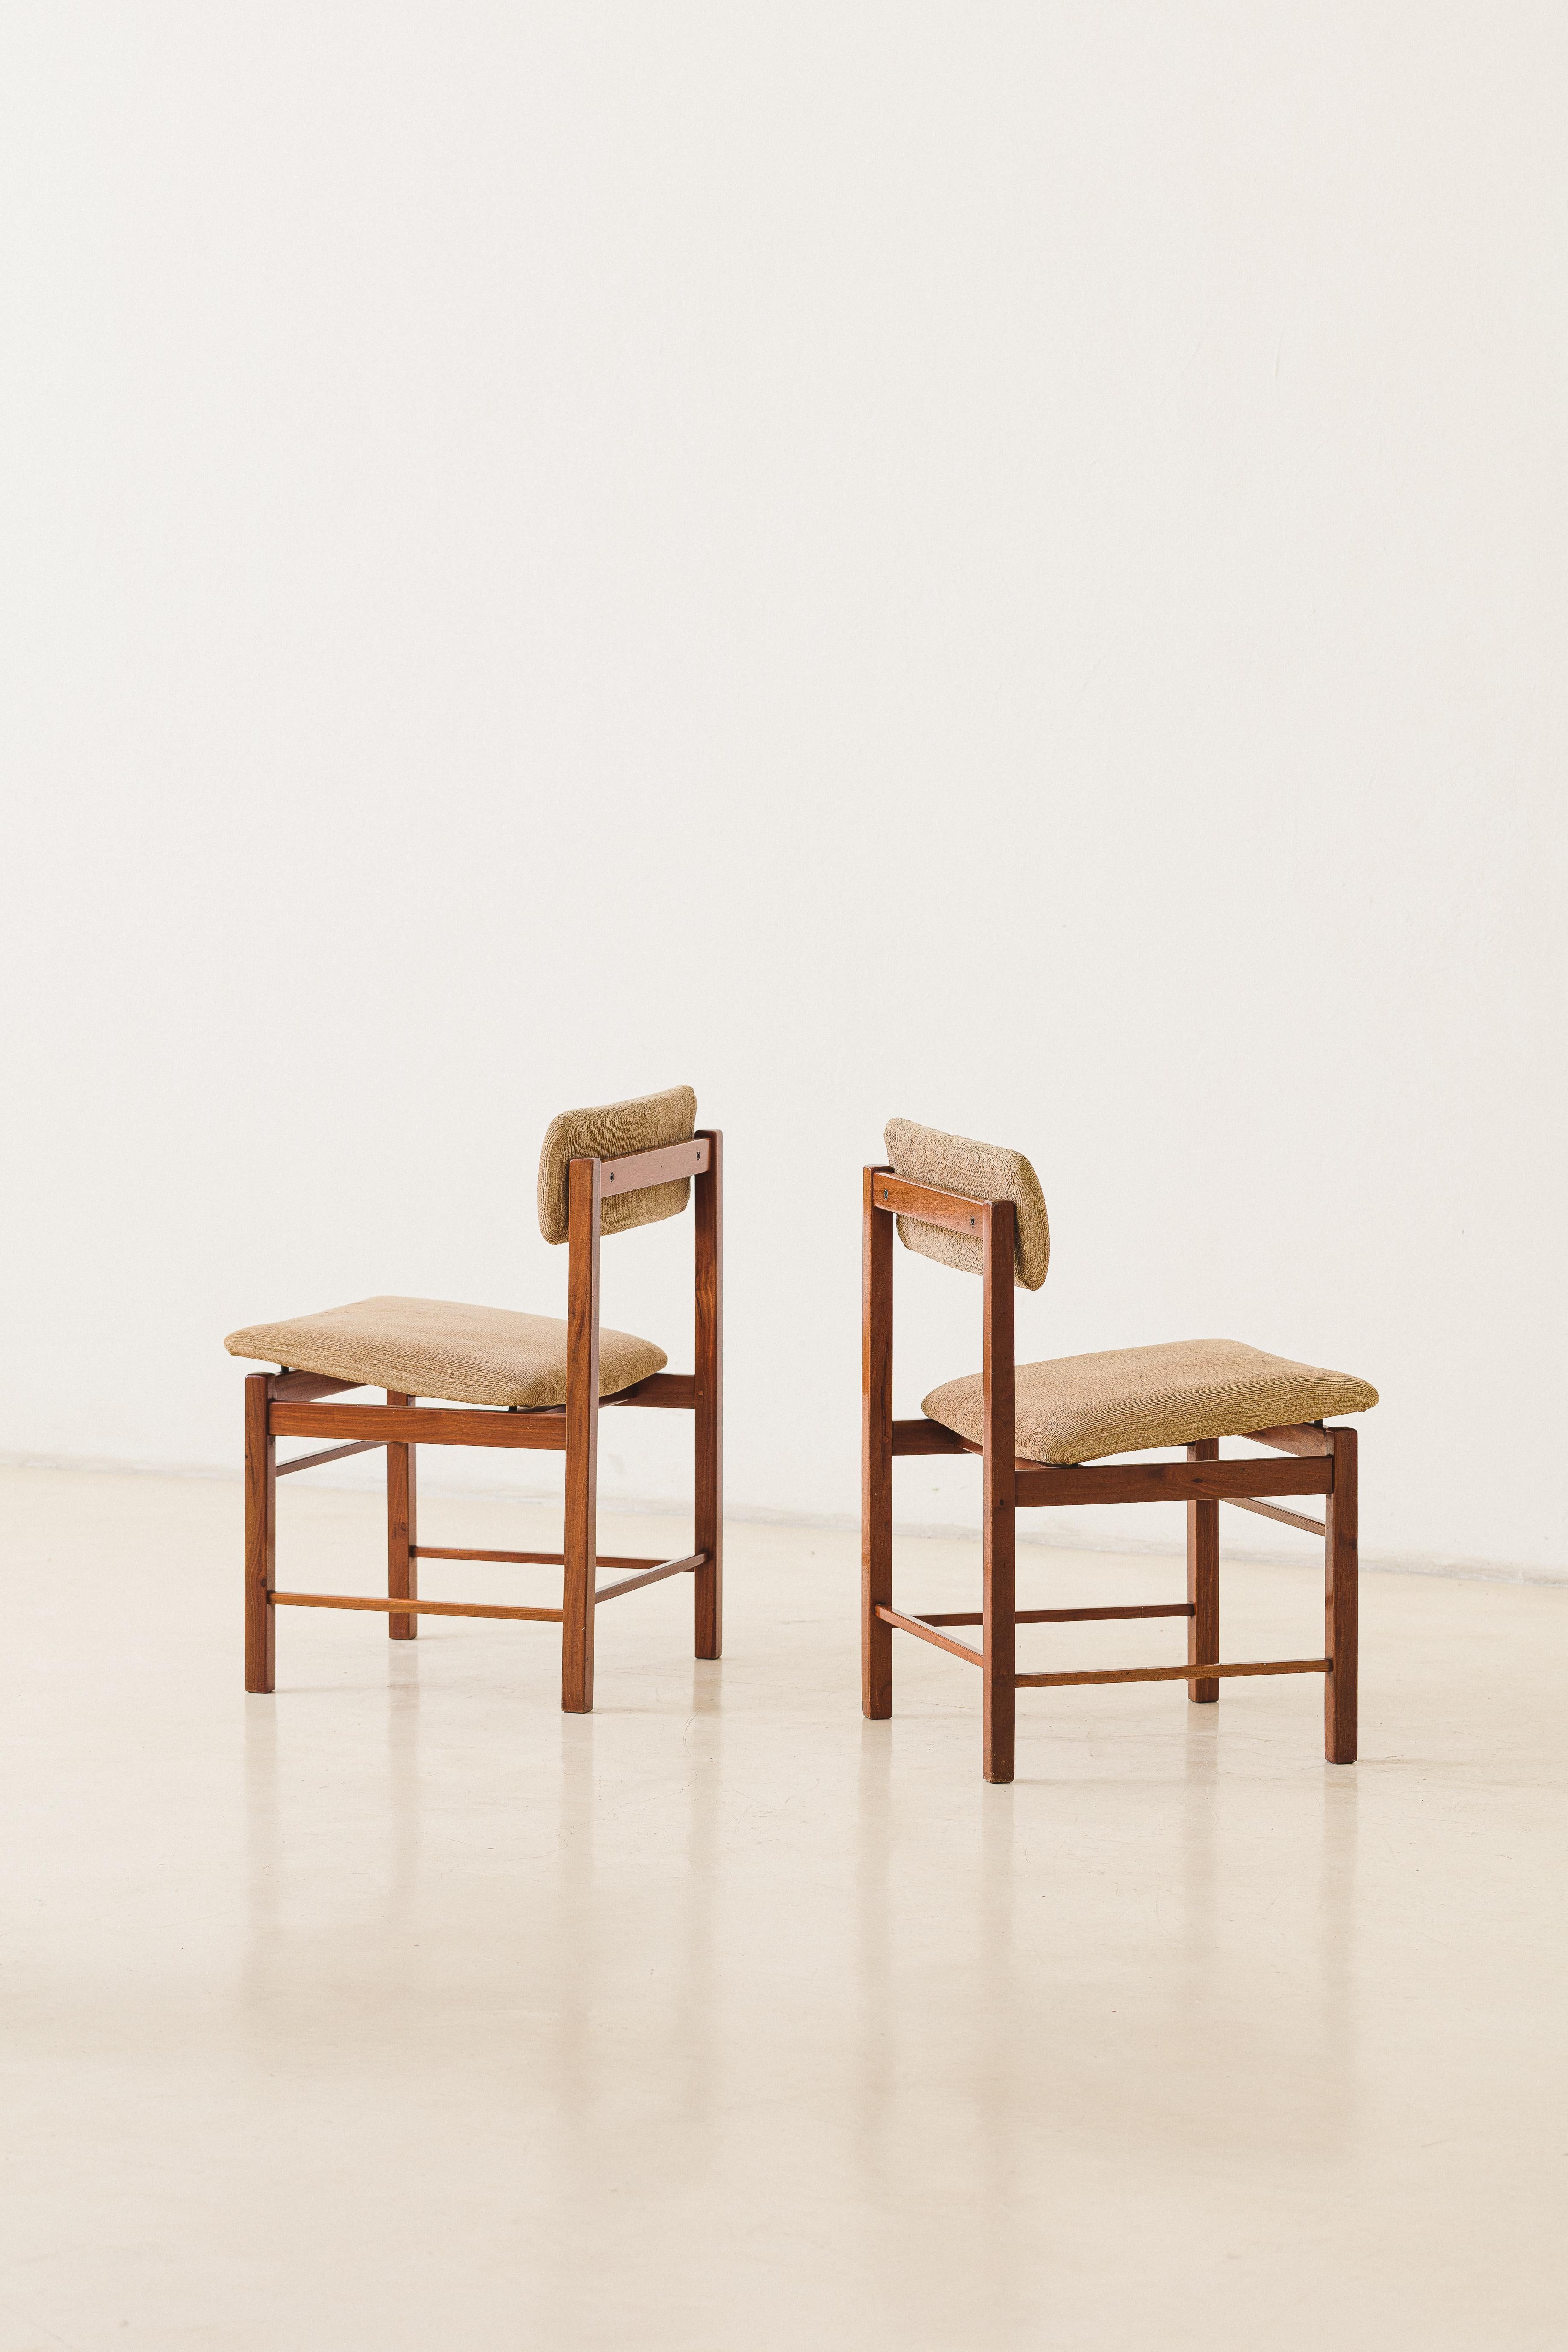 Mid-20th Century Set of Six Dining Chairs by Ernesto Hauner, Freijó Wood, Mobilinea, 1960s For Sale